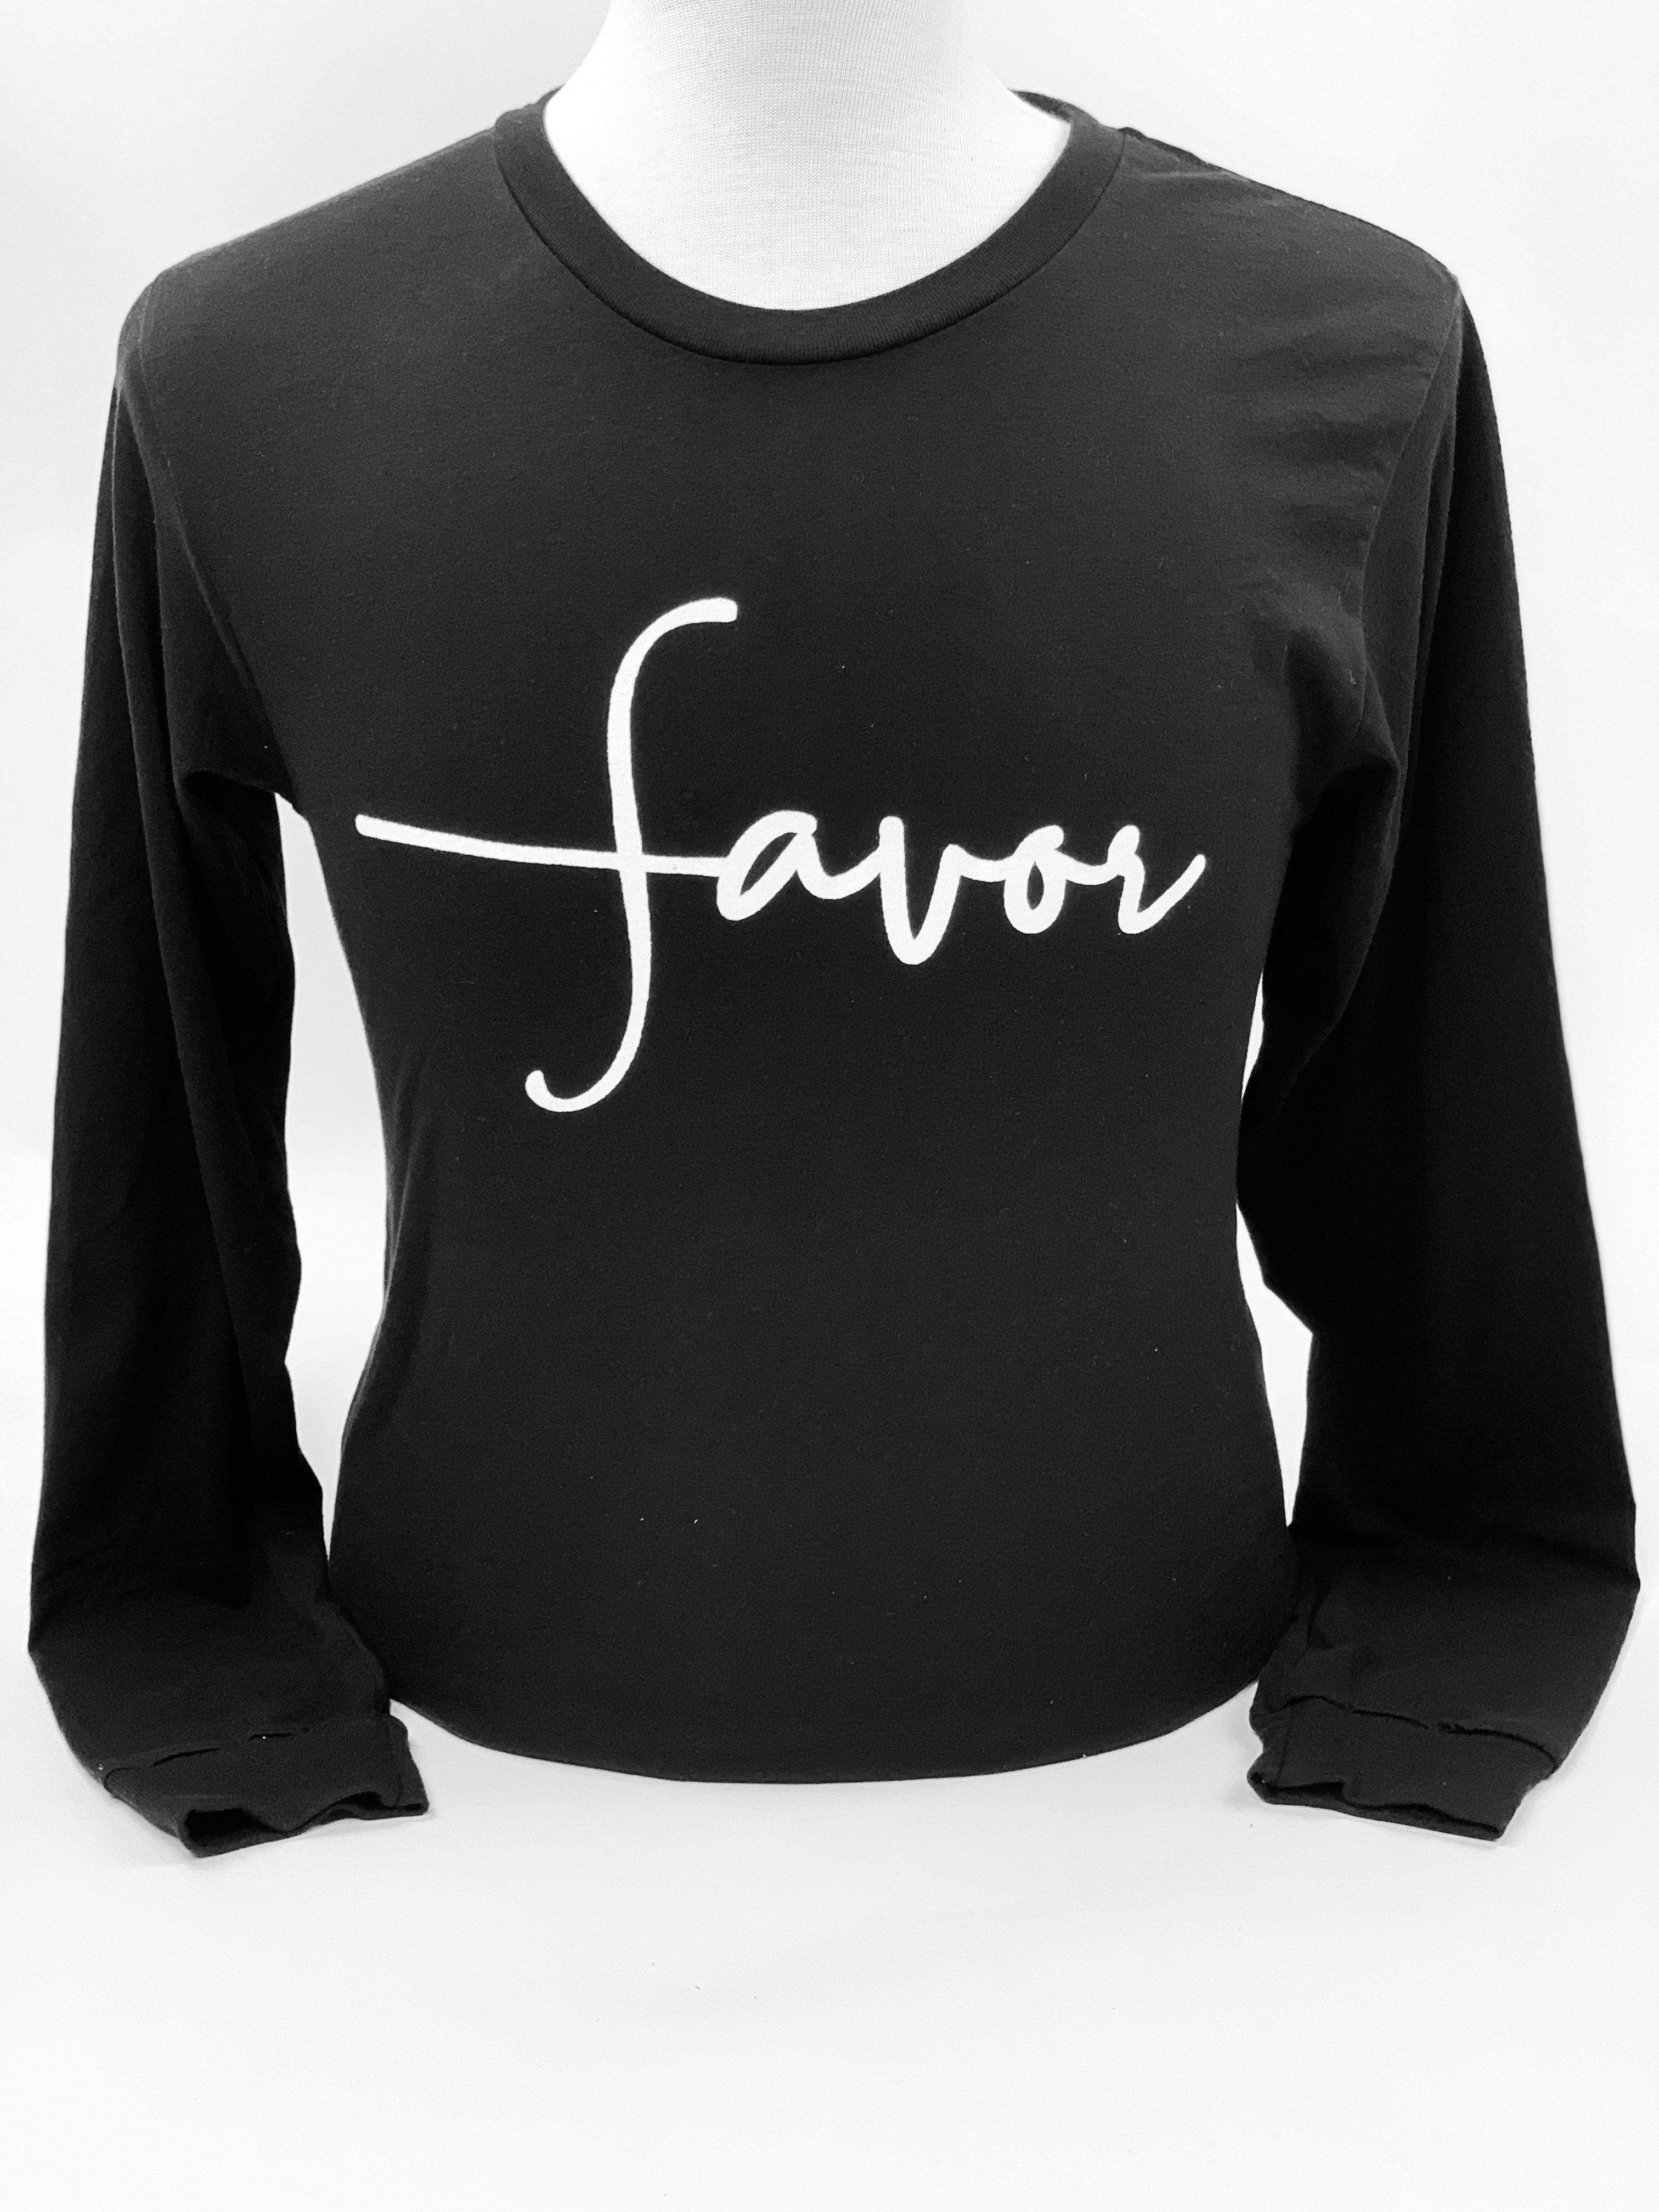 Favor Long-Sleeve Shirt Black and White - Jewellery Unique Gifts & Accessories